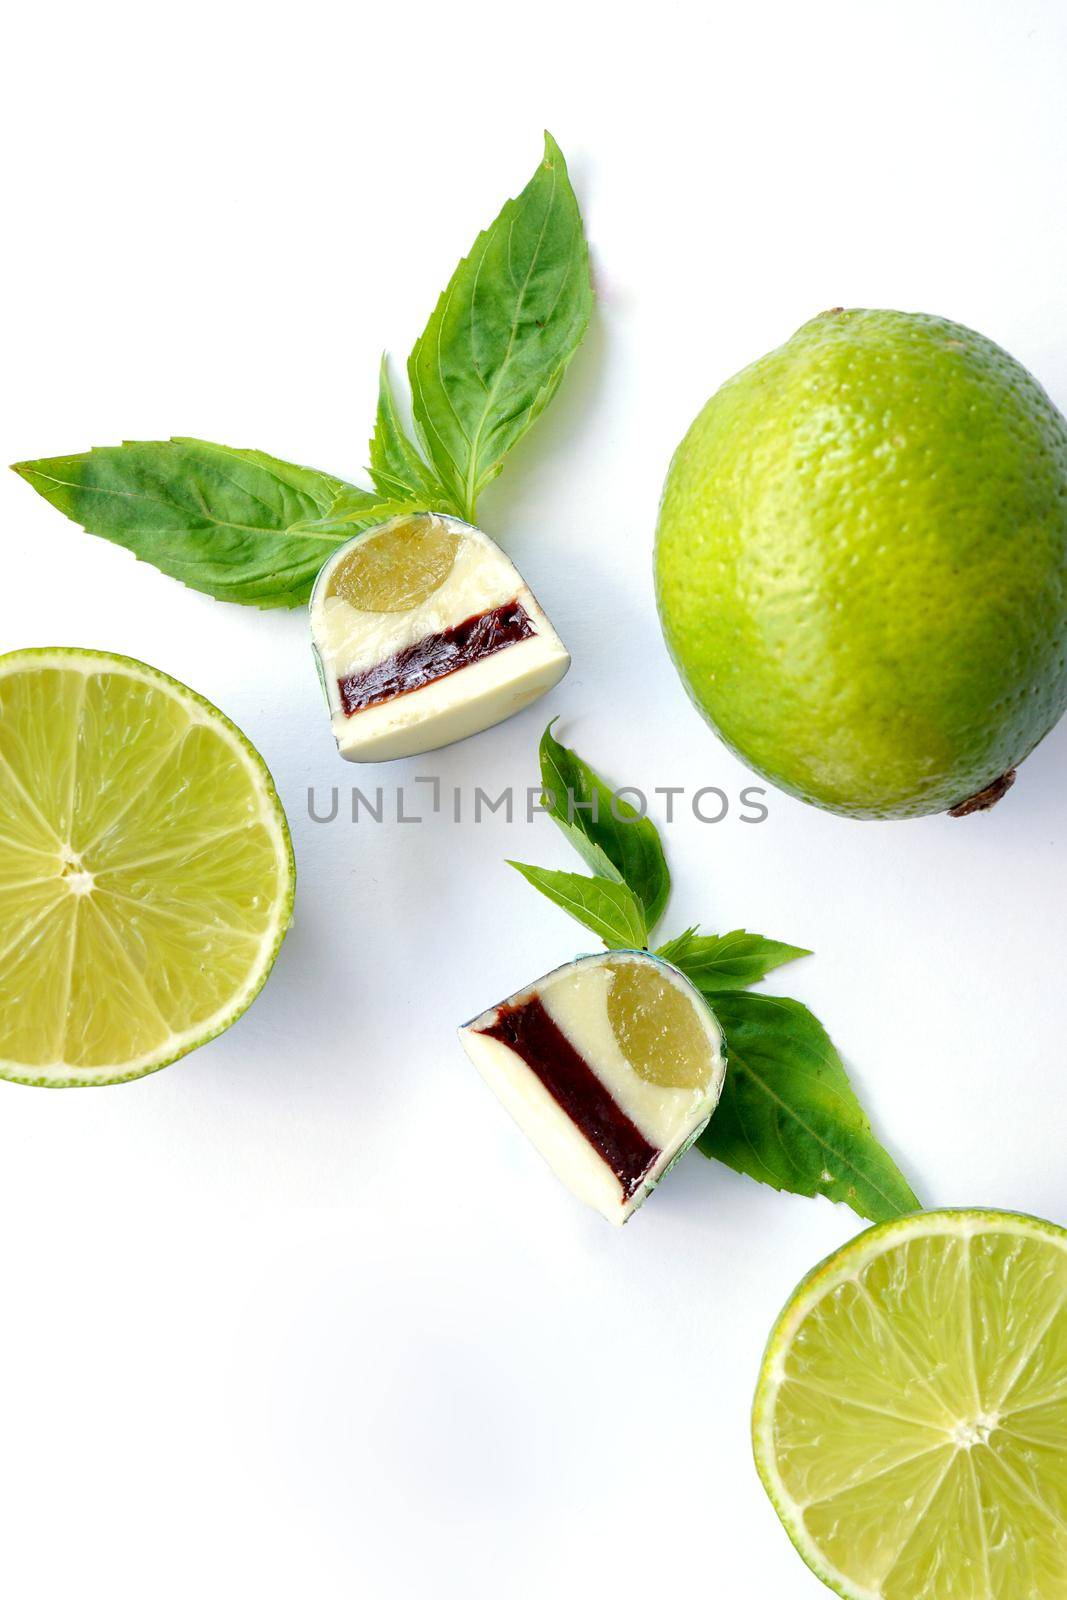 Cutaway chocolate candy. Lime and basil on a white background. Handmade sweets. Top View